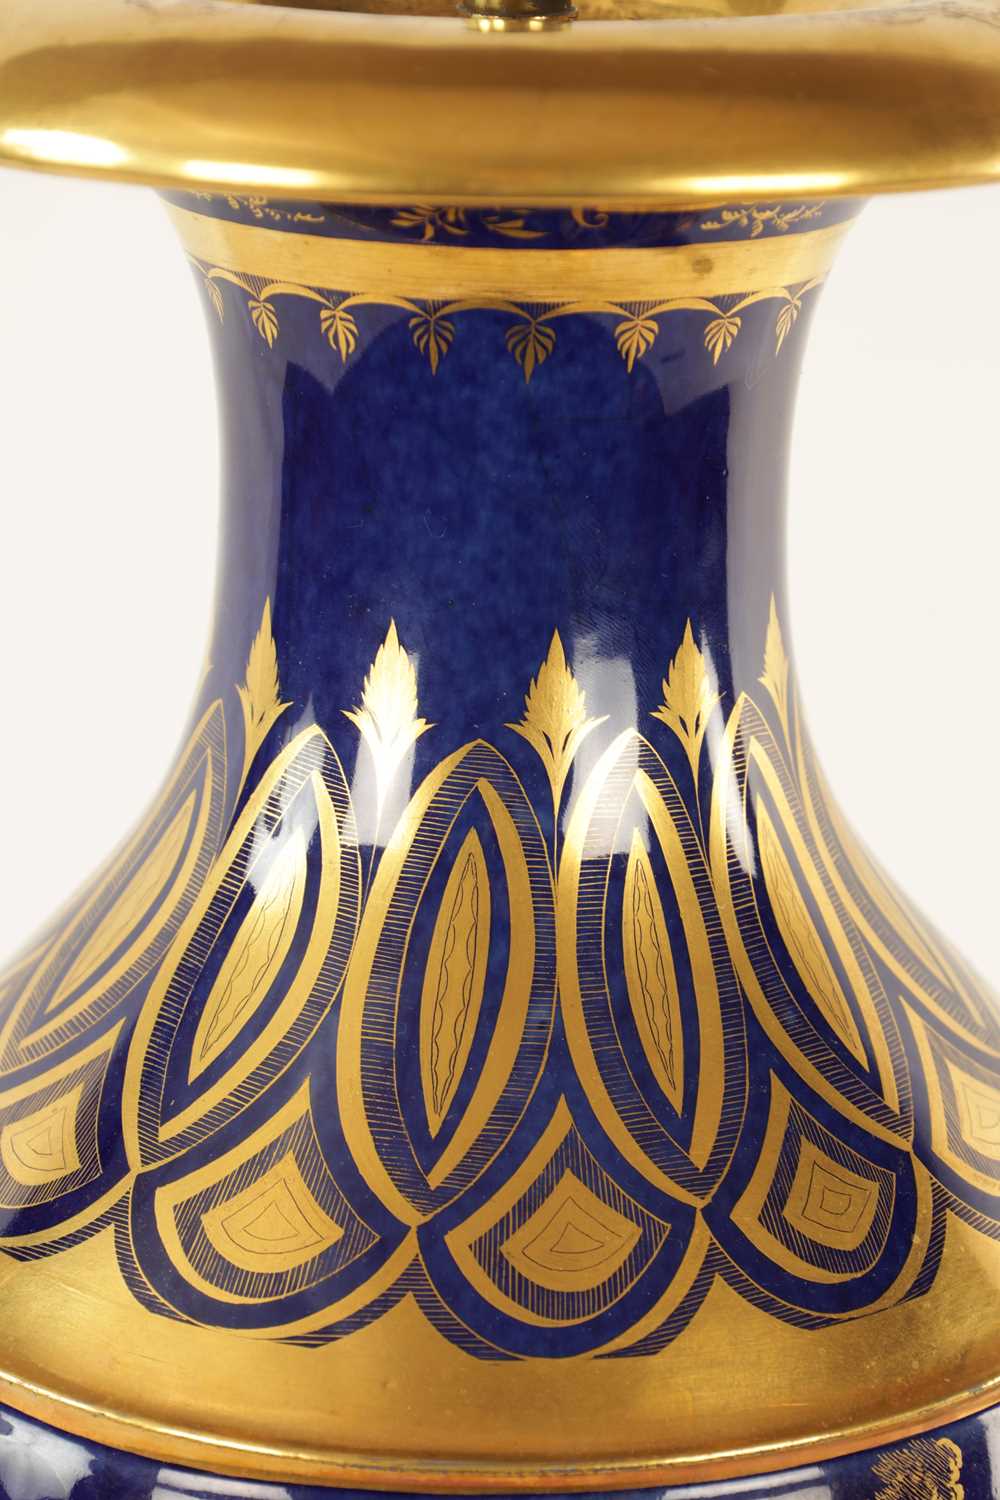 AN EARLY 19TH CENTURY FRENCH PARIS PORCELAIN ROYAL BLUE AND GILT URN SHAPED PEDESTAL VASE - Image 4 of 8